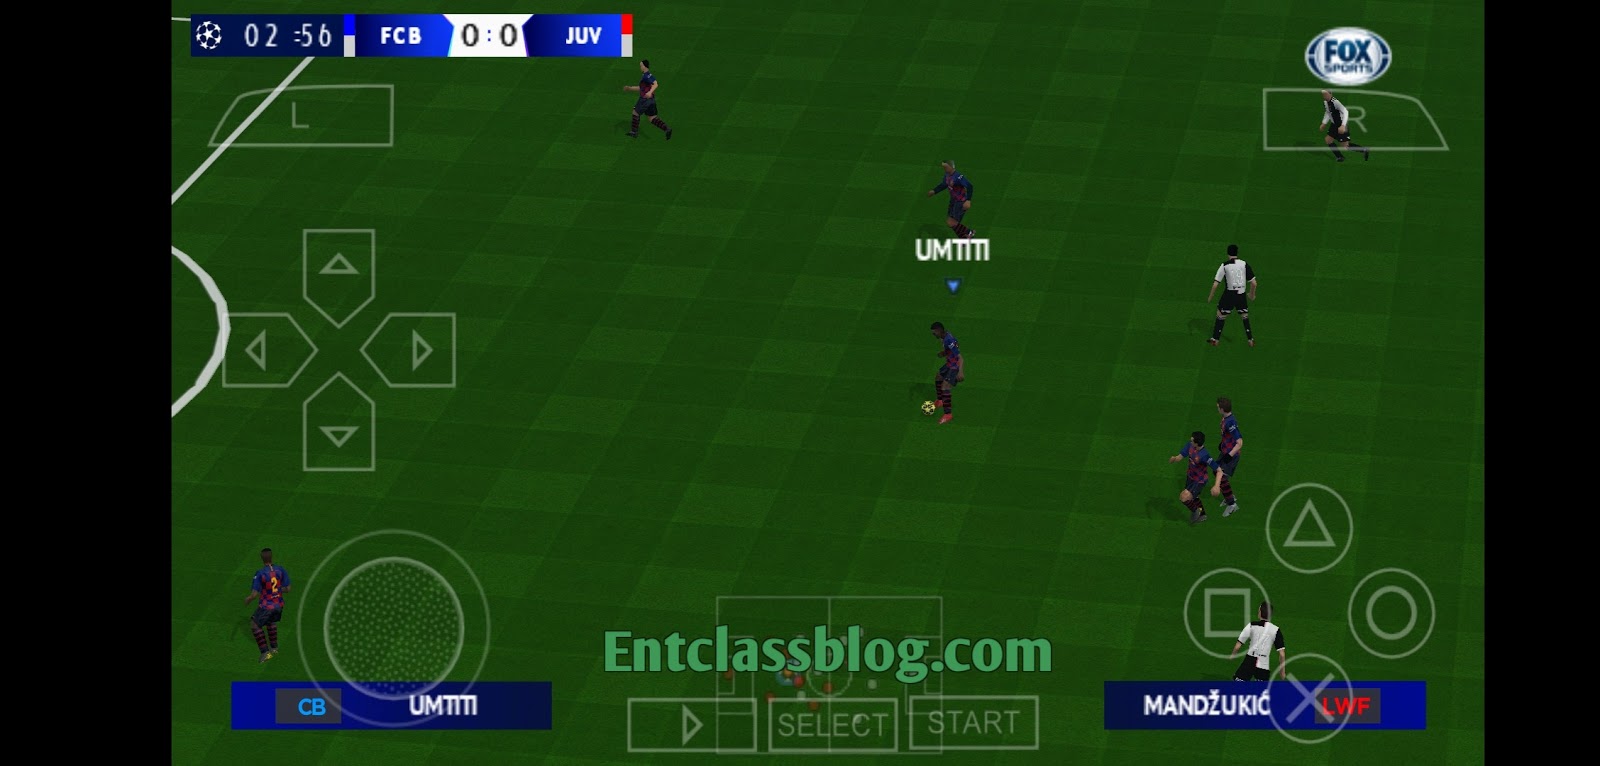 Pes 2016 iso file download for ppsspp on android by jogress